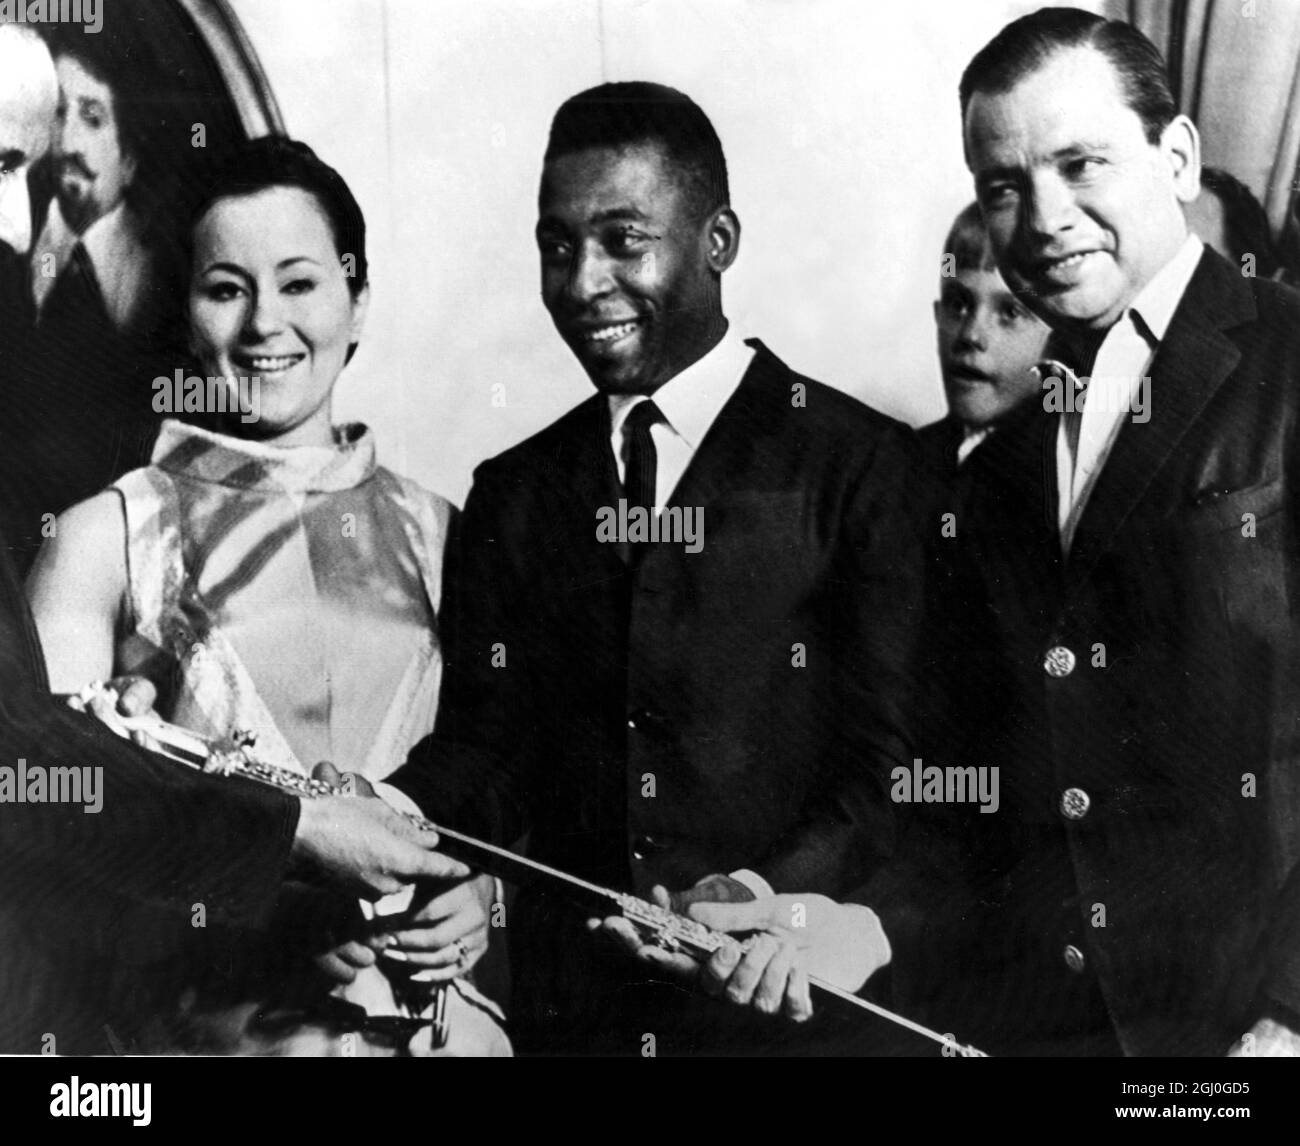 Pele receiving another award, the Gold Sword, presented by the British Year Sports Book. Ernest Hecht (left), awards the International Football Year Book to Pele. Pele's wife, Rosemaire Nascimento is second left and Sao Paolo governor, Roberto De Abreu is on the right. 21st February 1968 Stock Photo